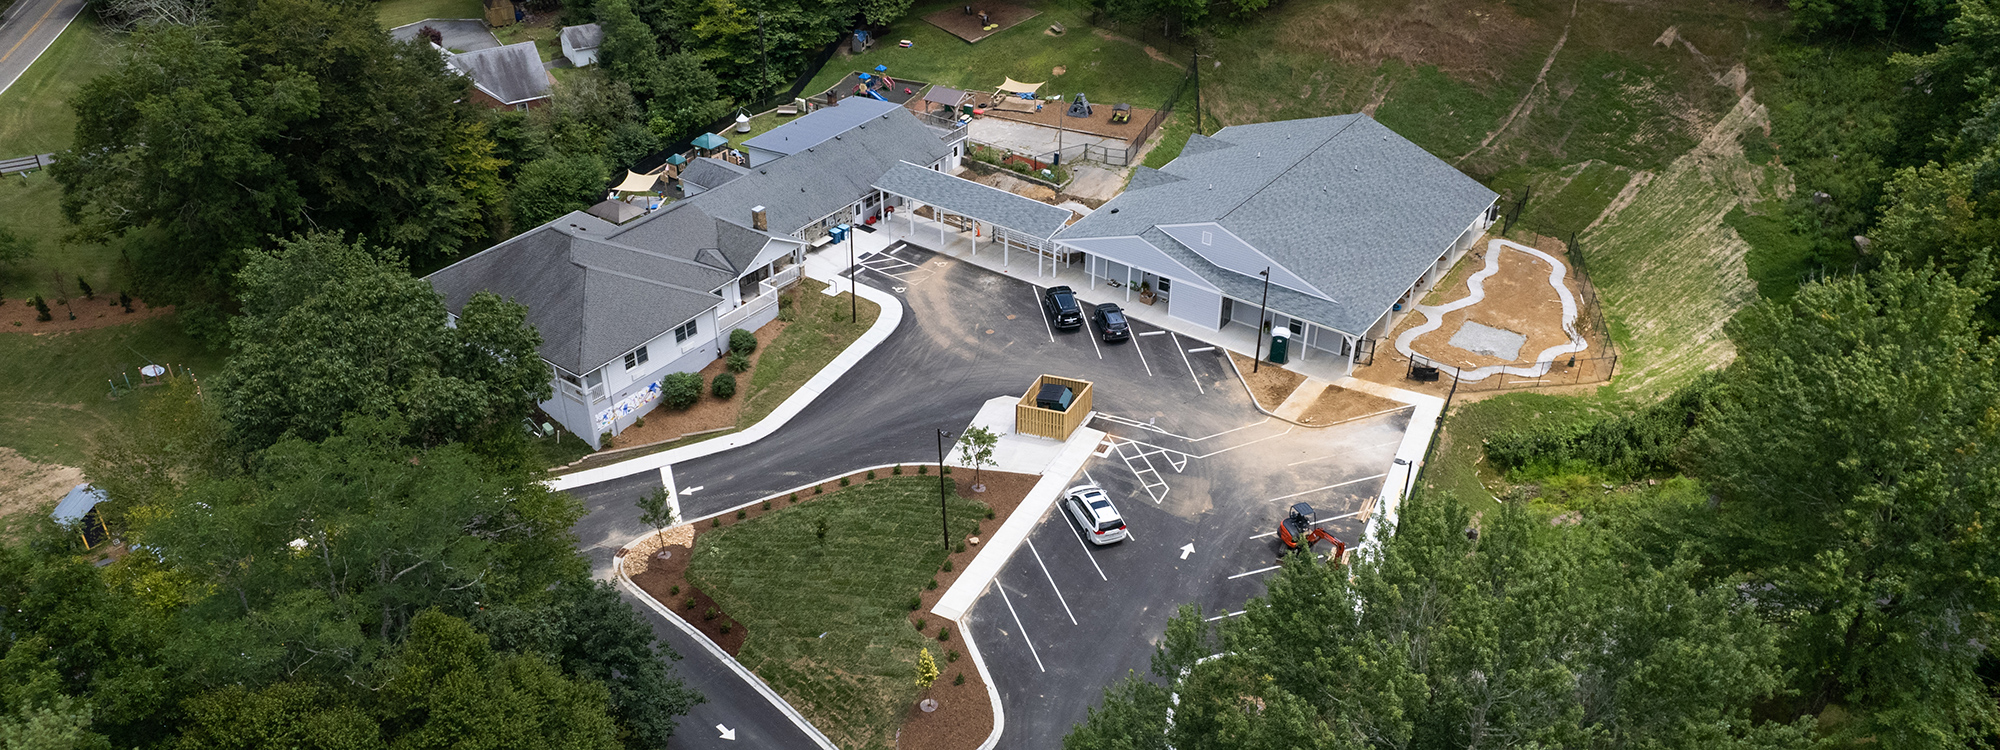 App State’s Child Development Center nearly doubles in capacity